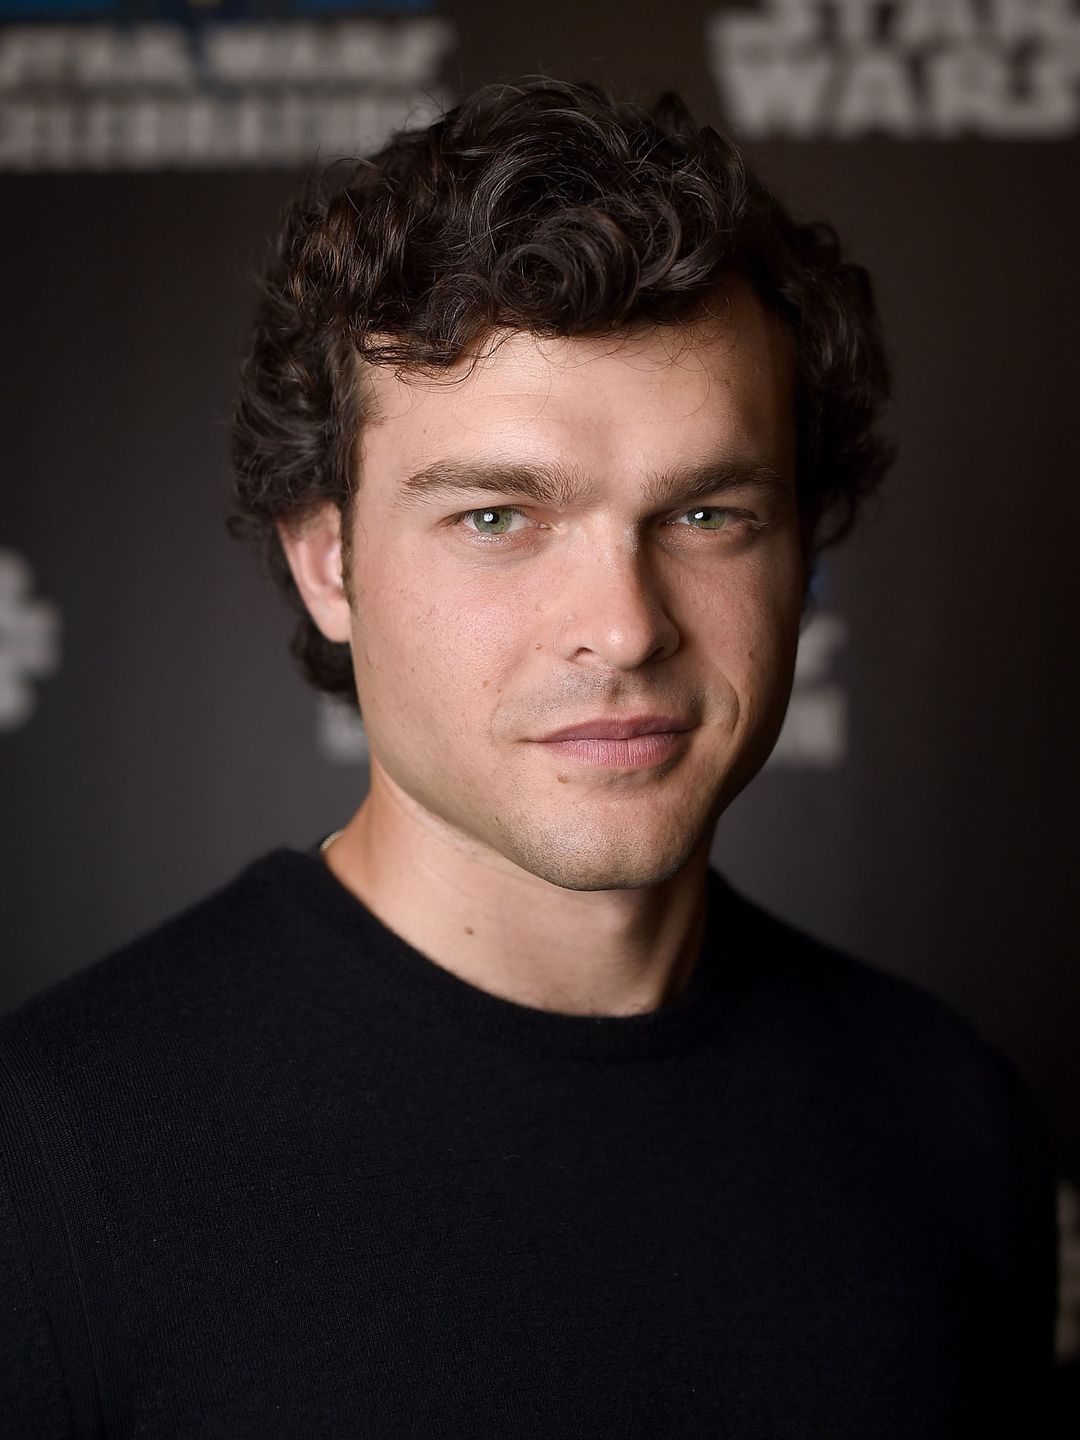 Alden Ehrenreich does he have a wife